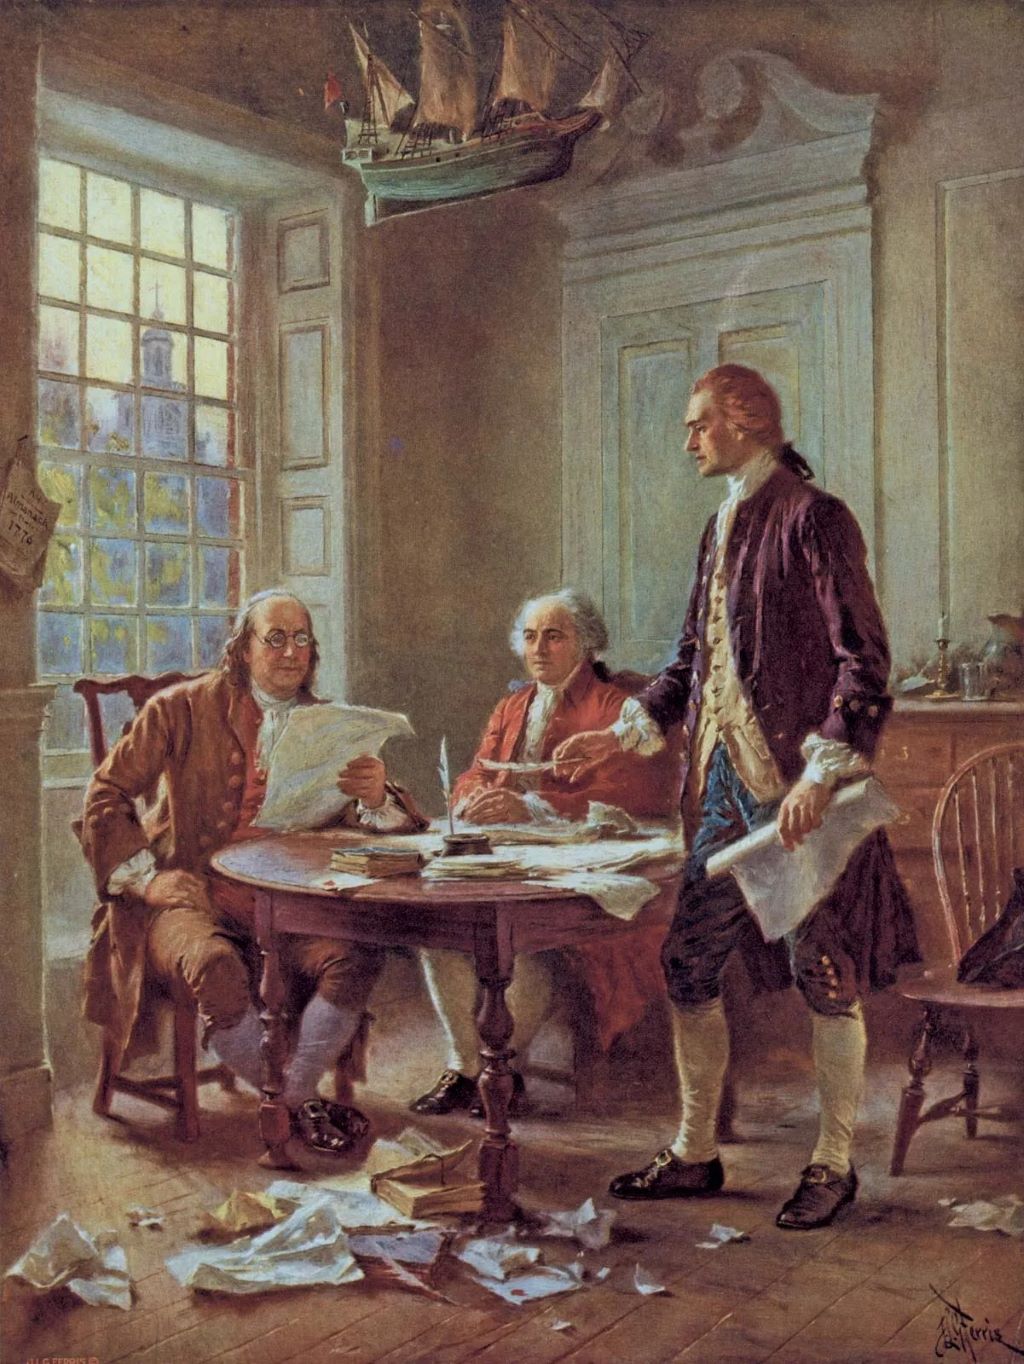 (From left to right) Benjamin Franklin, John Adams, and Thomas Jefferson discussing a draft of the Declaration of Independence, 1776.jpg